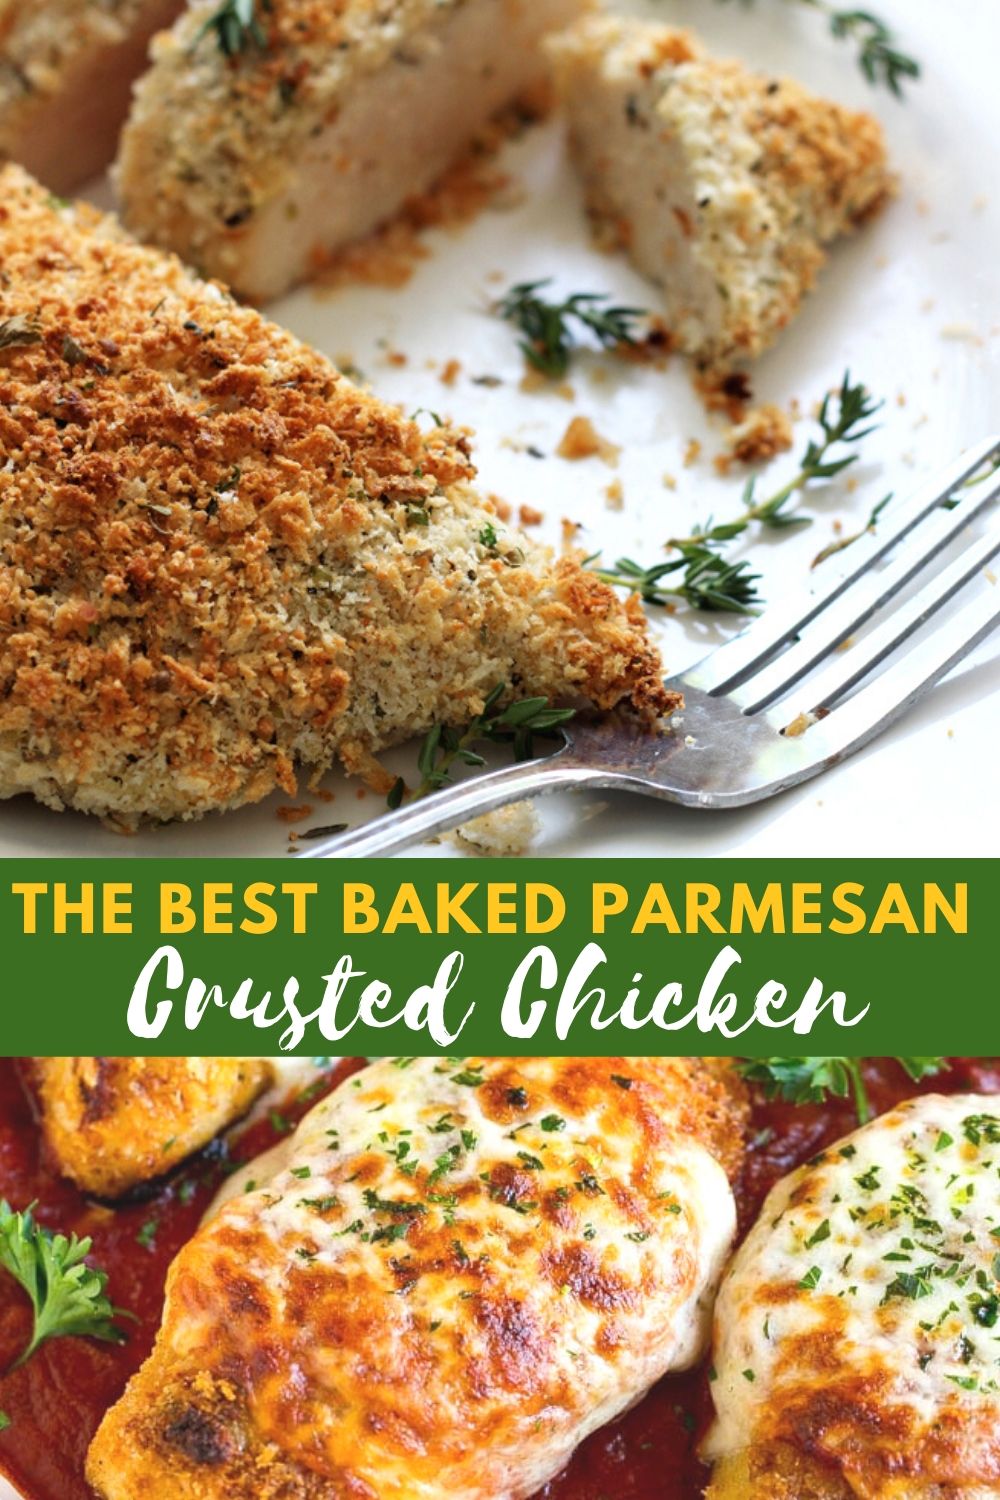 The Best Baked Parmesan Crusted Chicken #crustedchicken #chickenrecipes